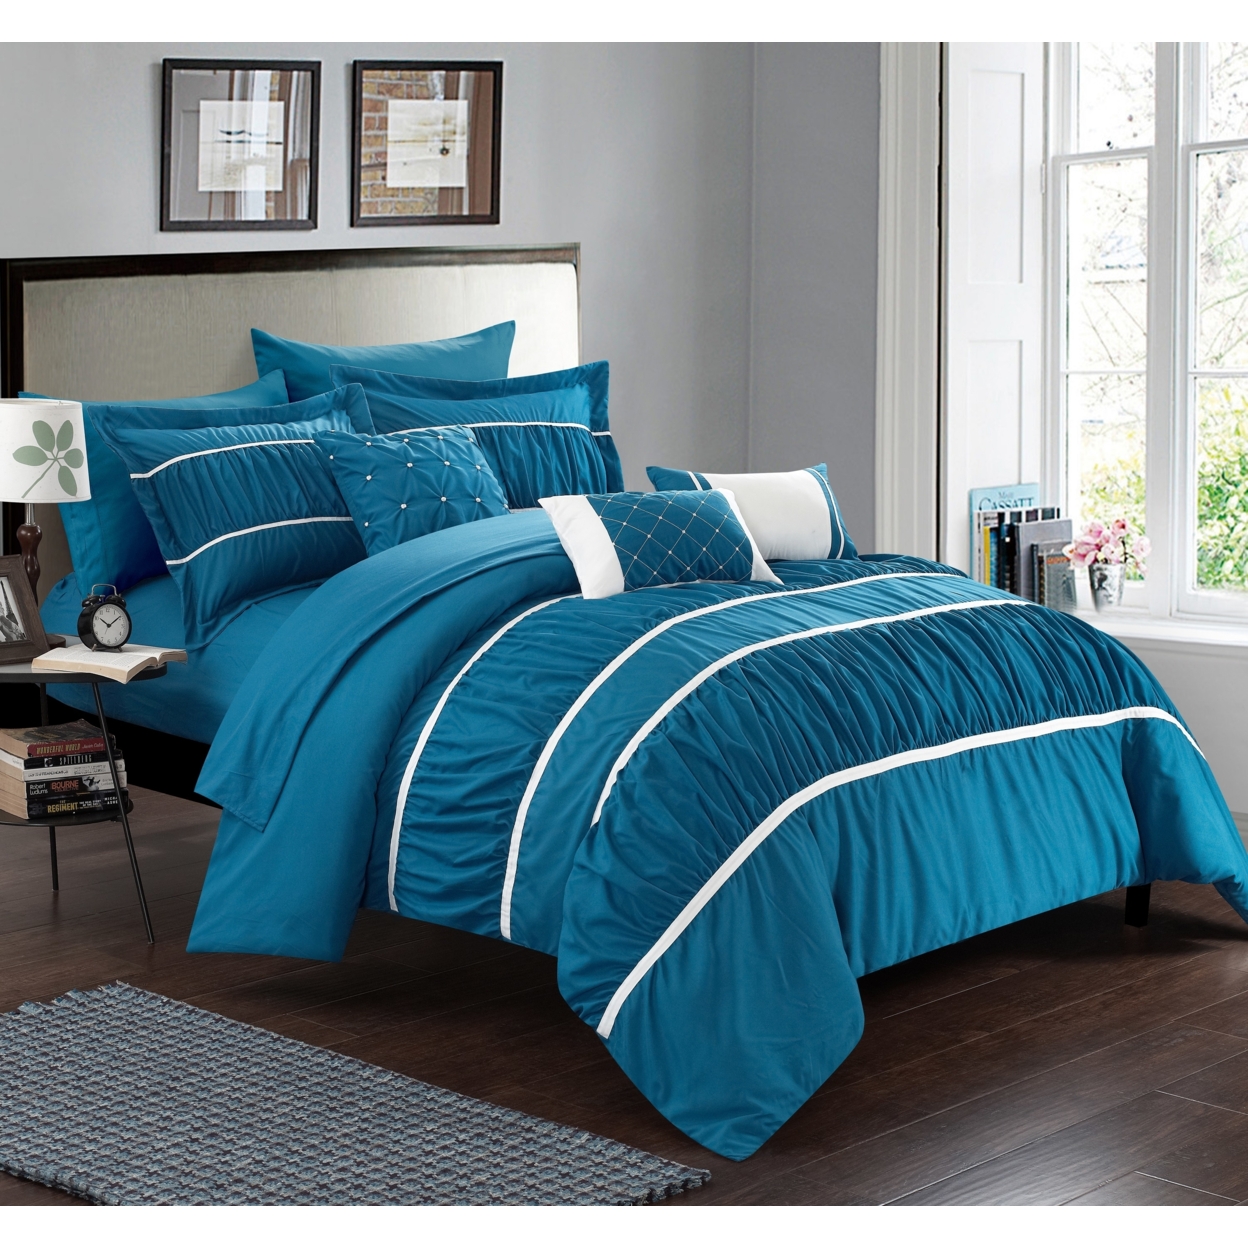 10-Piece Aero Pleated & Ruffled Bed In A Bag Comforter And Sheet Set - Teal, Queen